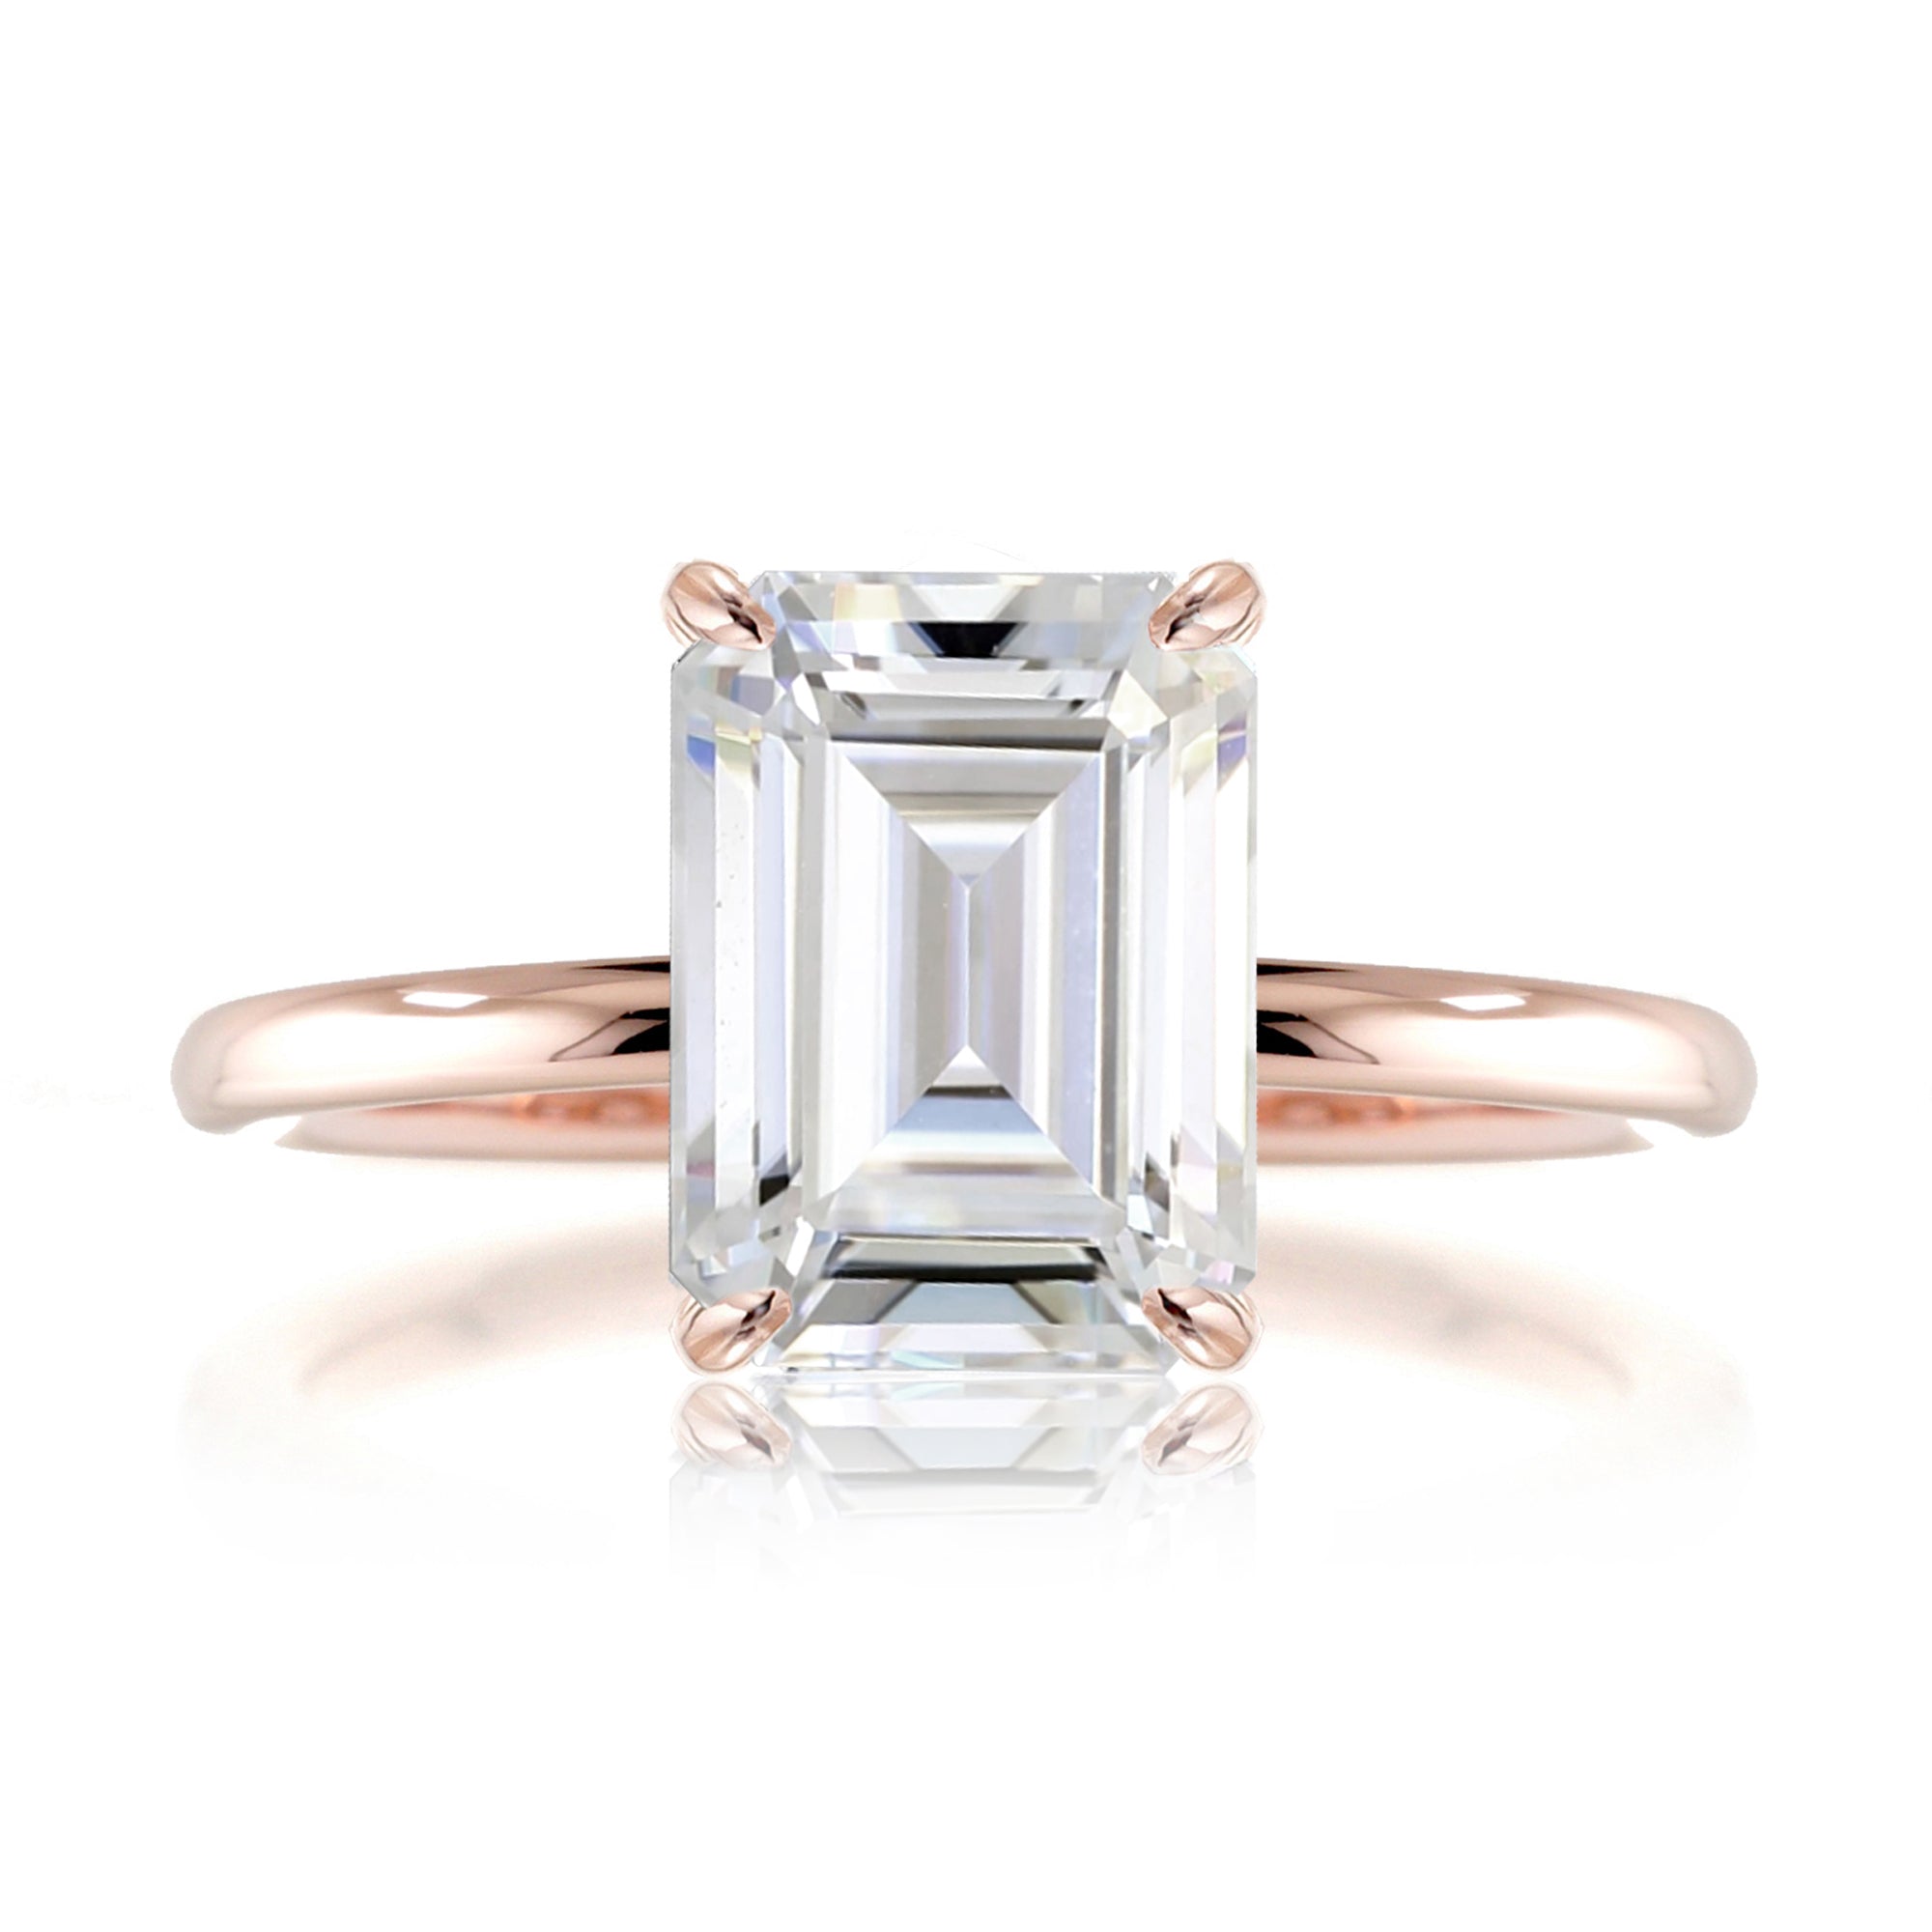 Emerald cut moissanite solid band engagement ring rose gold - The Ava